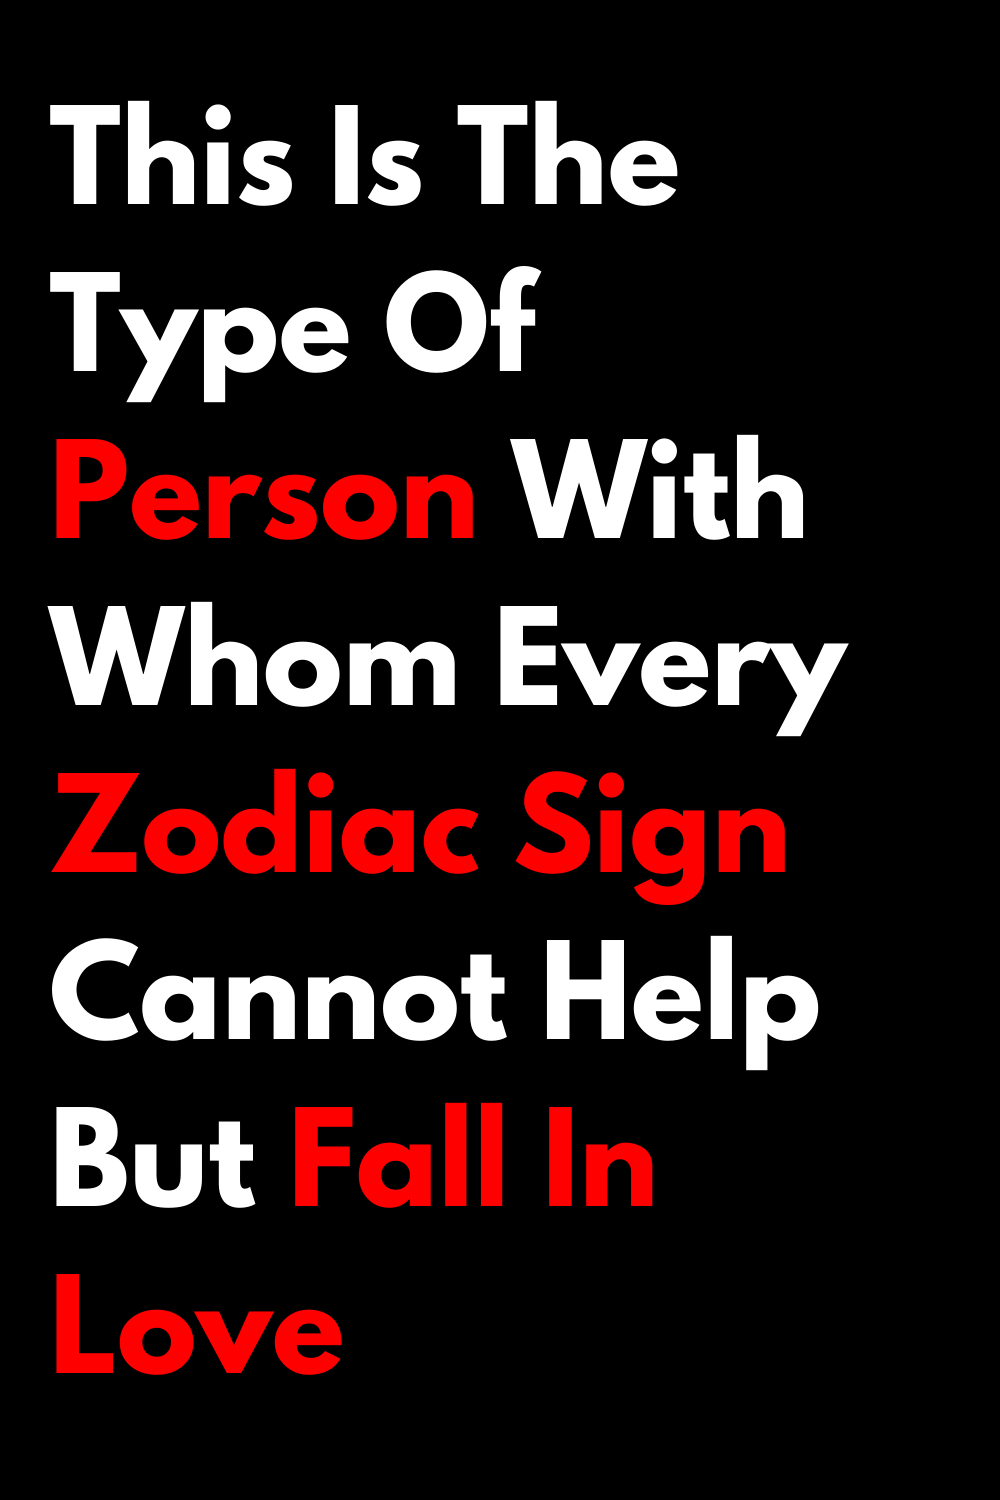 This Is The Type Of Person With Whom Every Zodiac Sign Cannot Help But Fall In Love